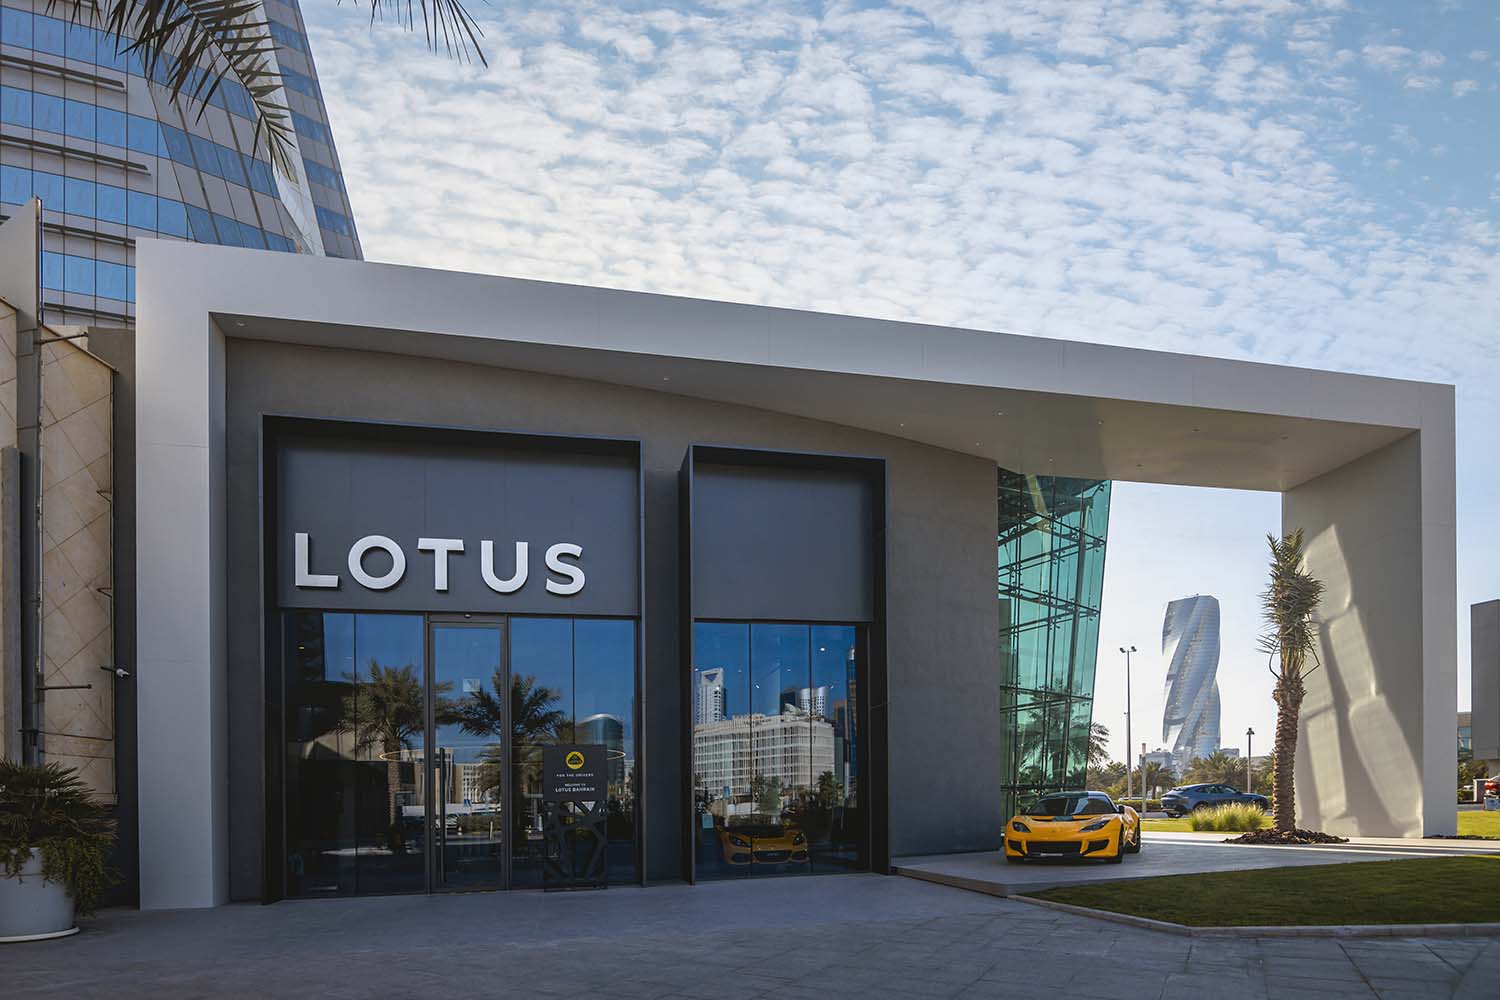 Another World Premiere From Lotus: First Showroom With New Global Retail Identity Now Open For Business